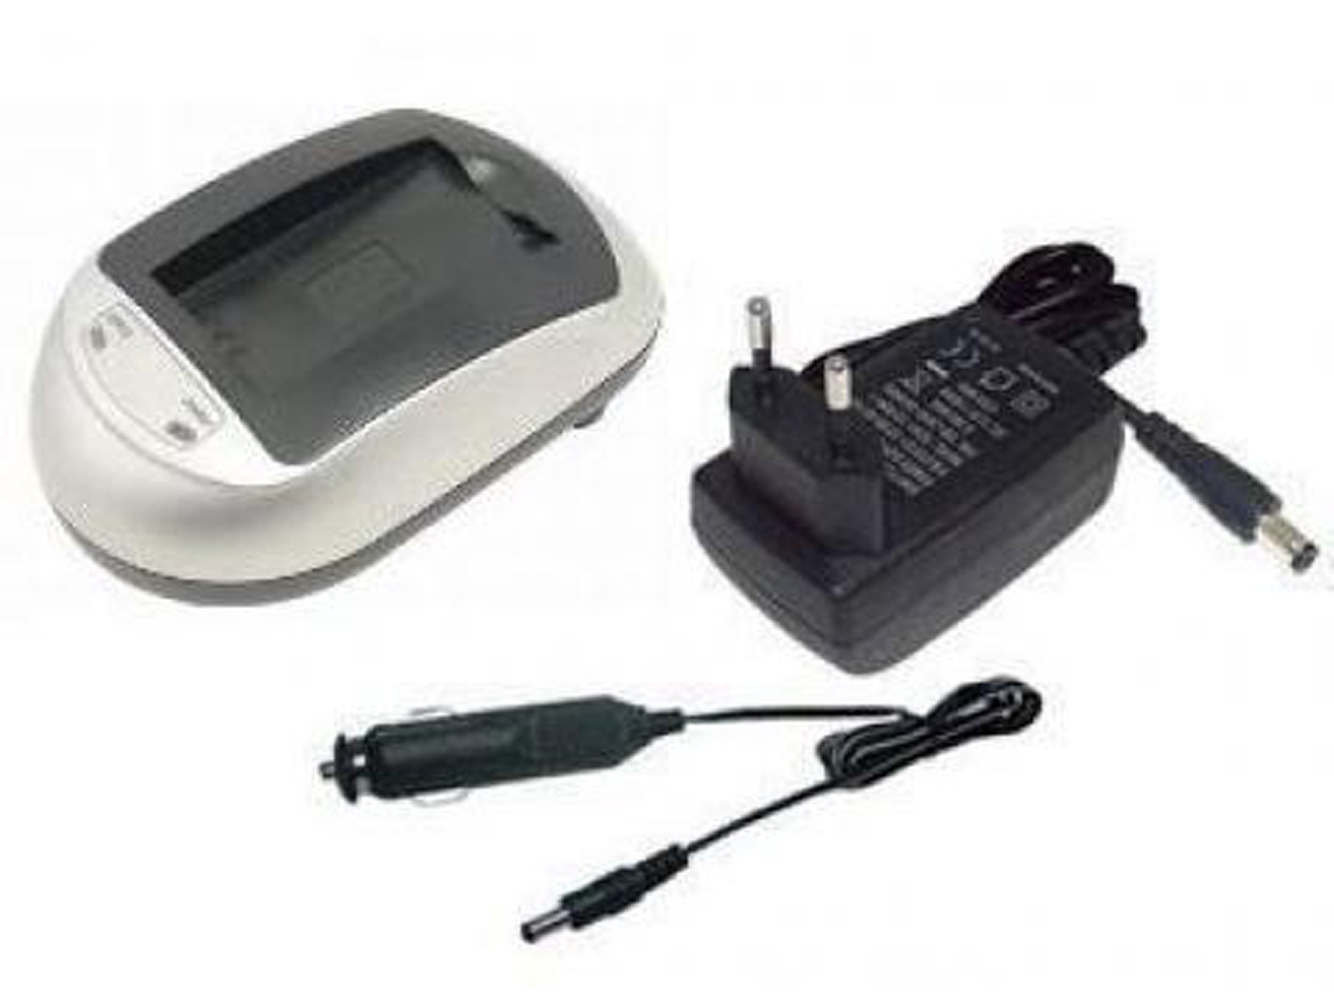 Kyocera Bp-780s Battery Chargers For Kyocera Contax Sl300rt, Kyocera Finecam Sl300r replacement